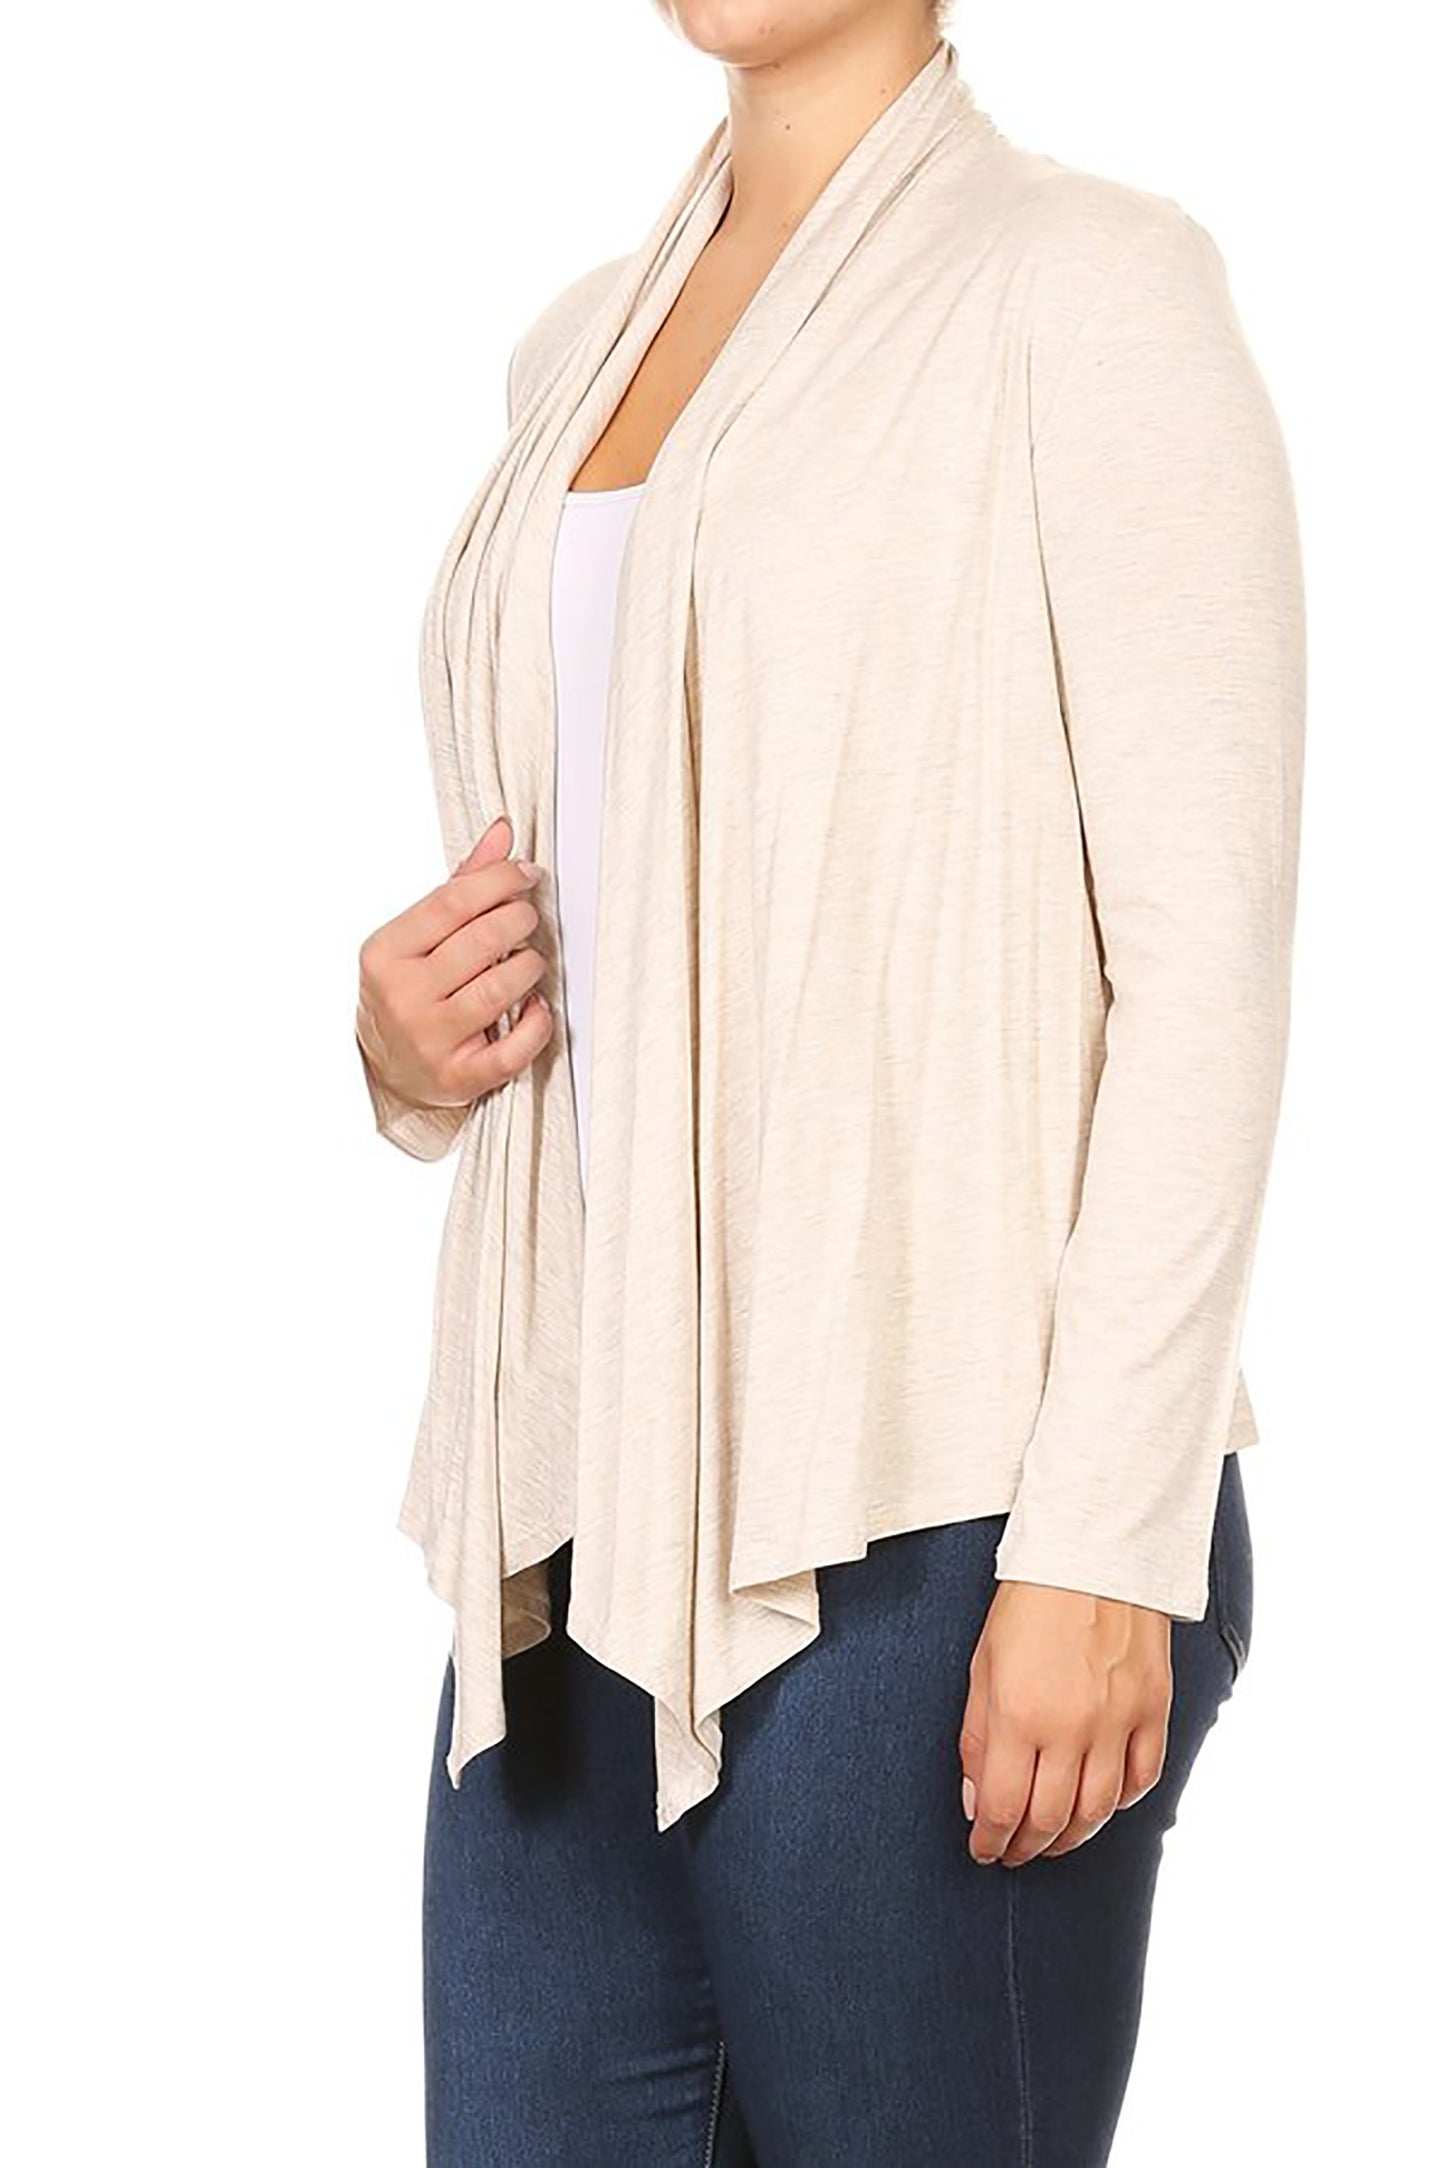 Women's Plus Size Long Sleeves Comfy Draped Open Front Solid Cardigan Made in USA